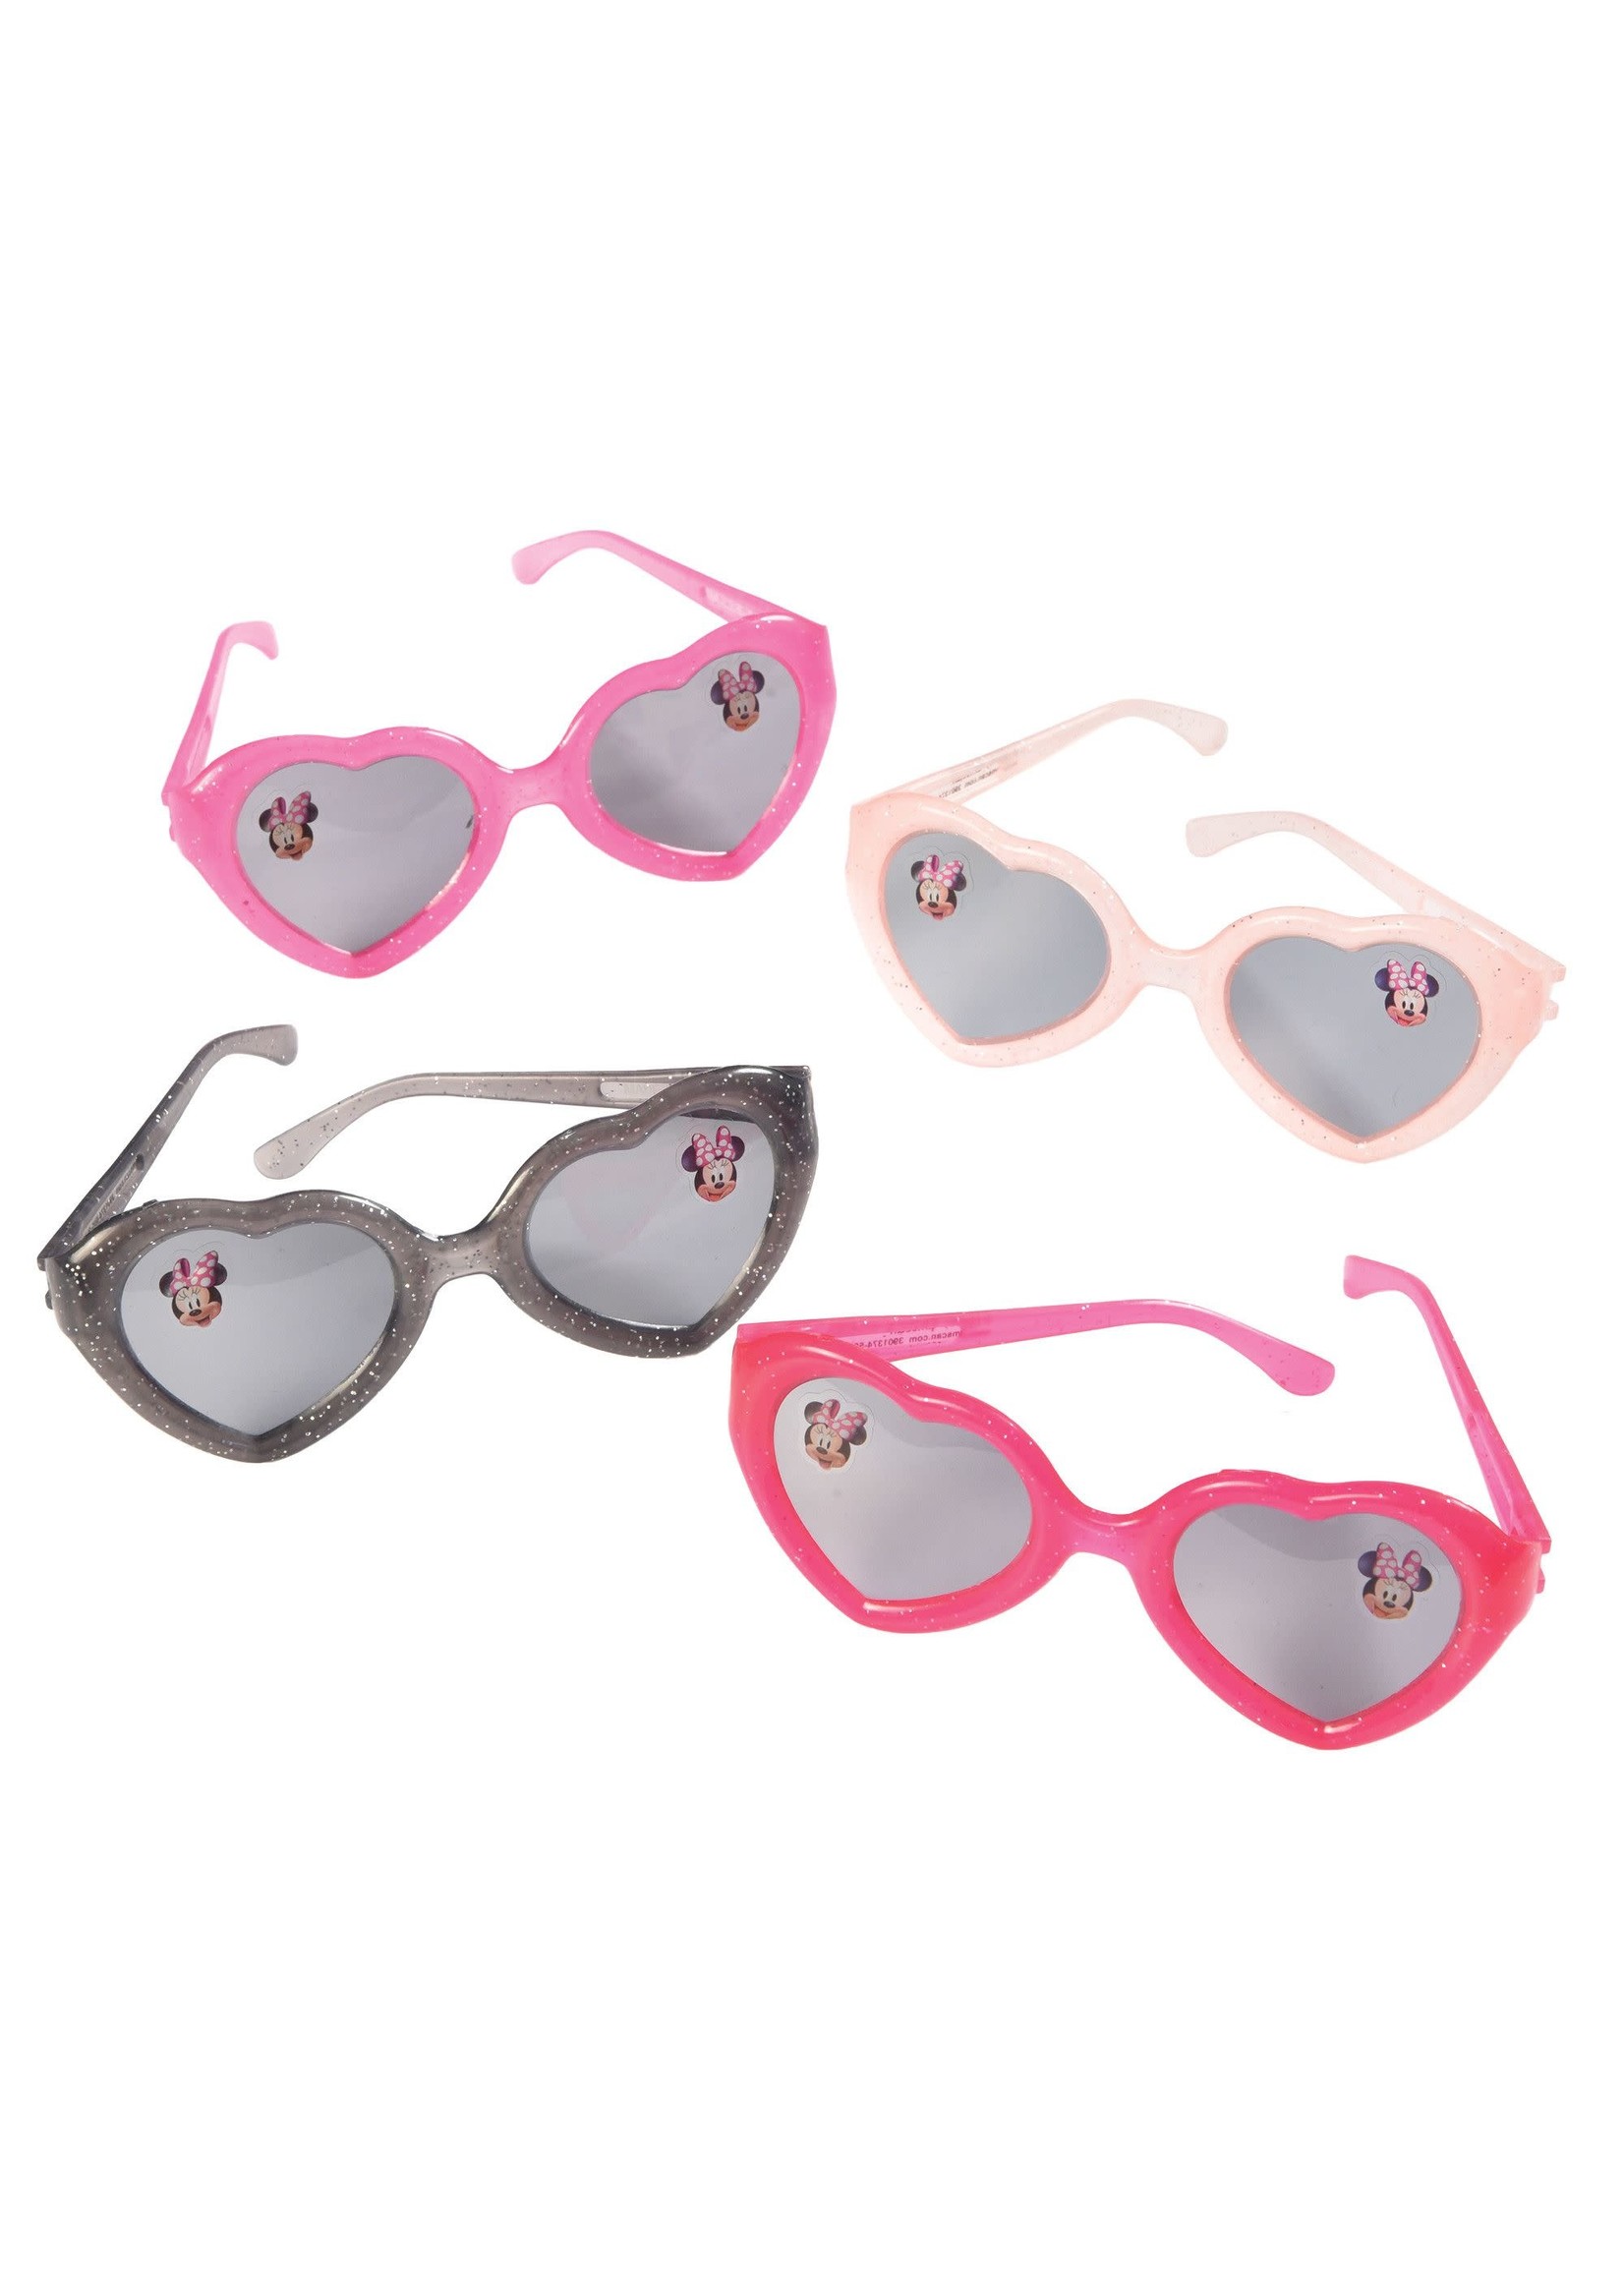 Minnie Mouse Forever Glasses - 8ct